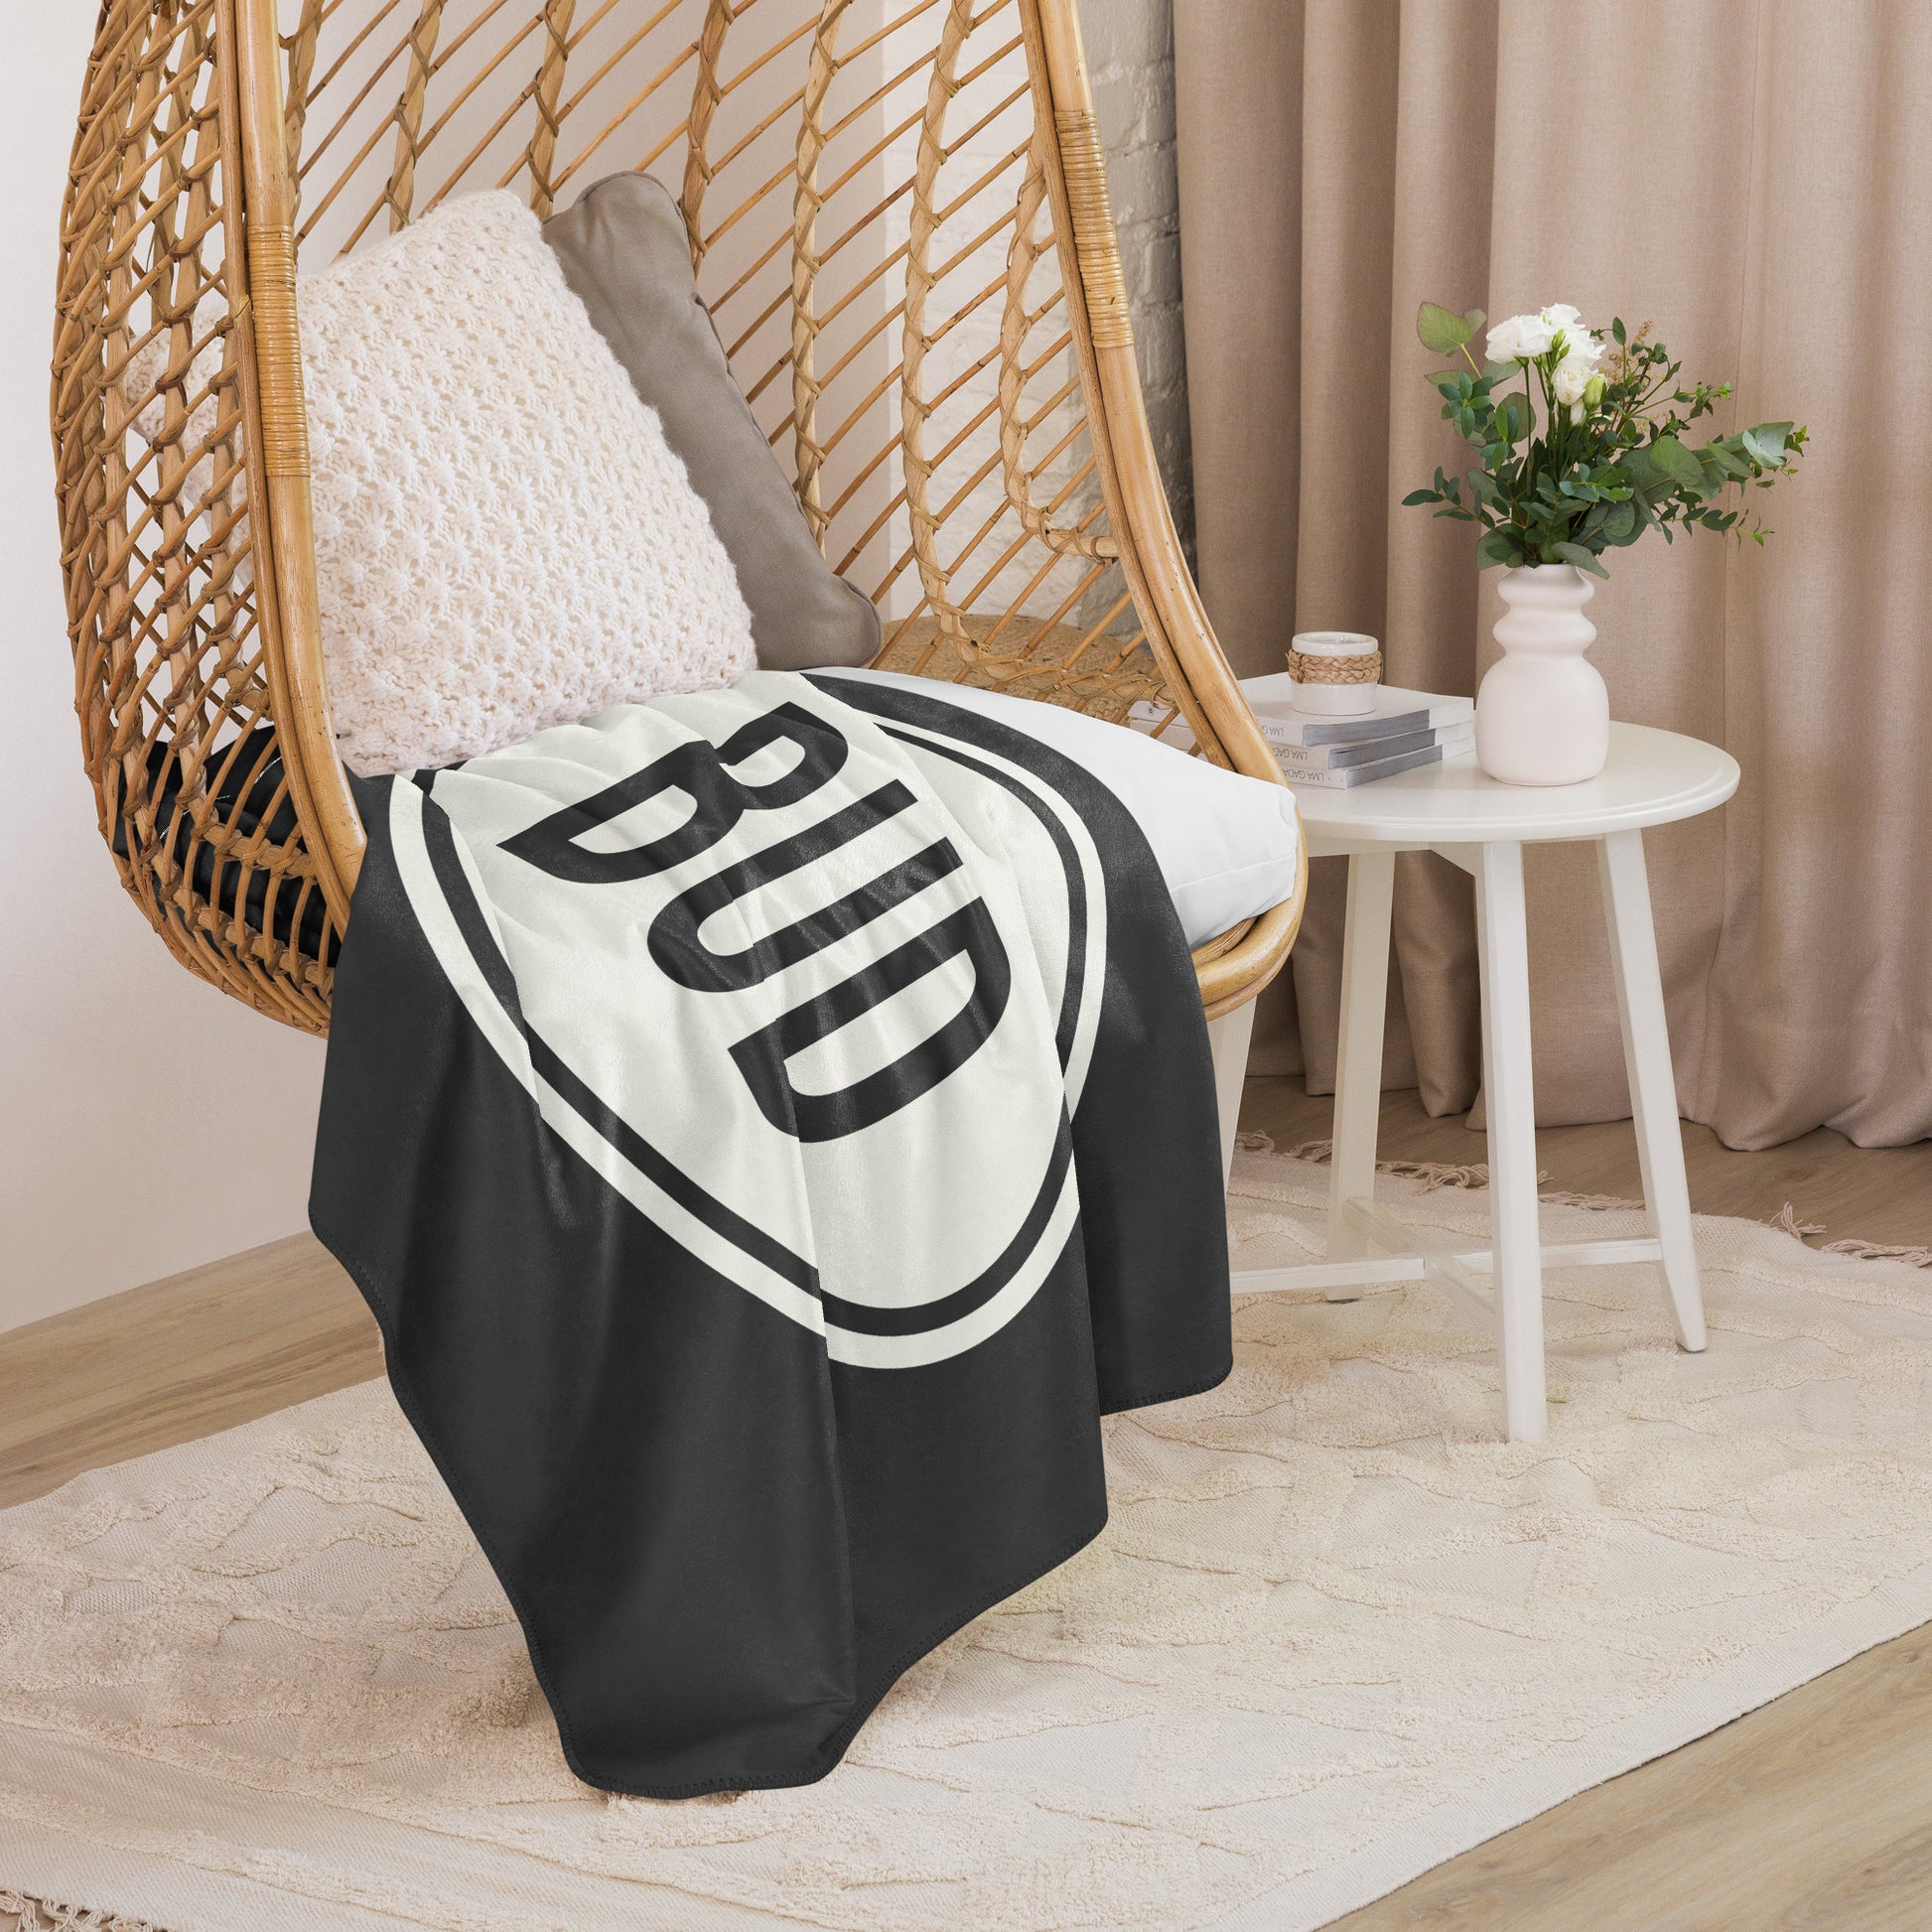 Unique Travel Gift Sherpa Blanket - White Oval • BUD Budapest • YHM Designs - Image 06